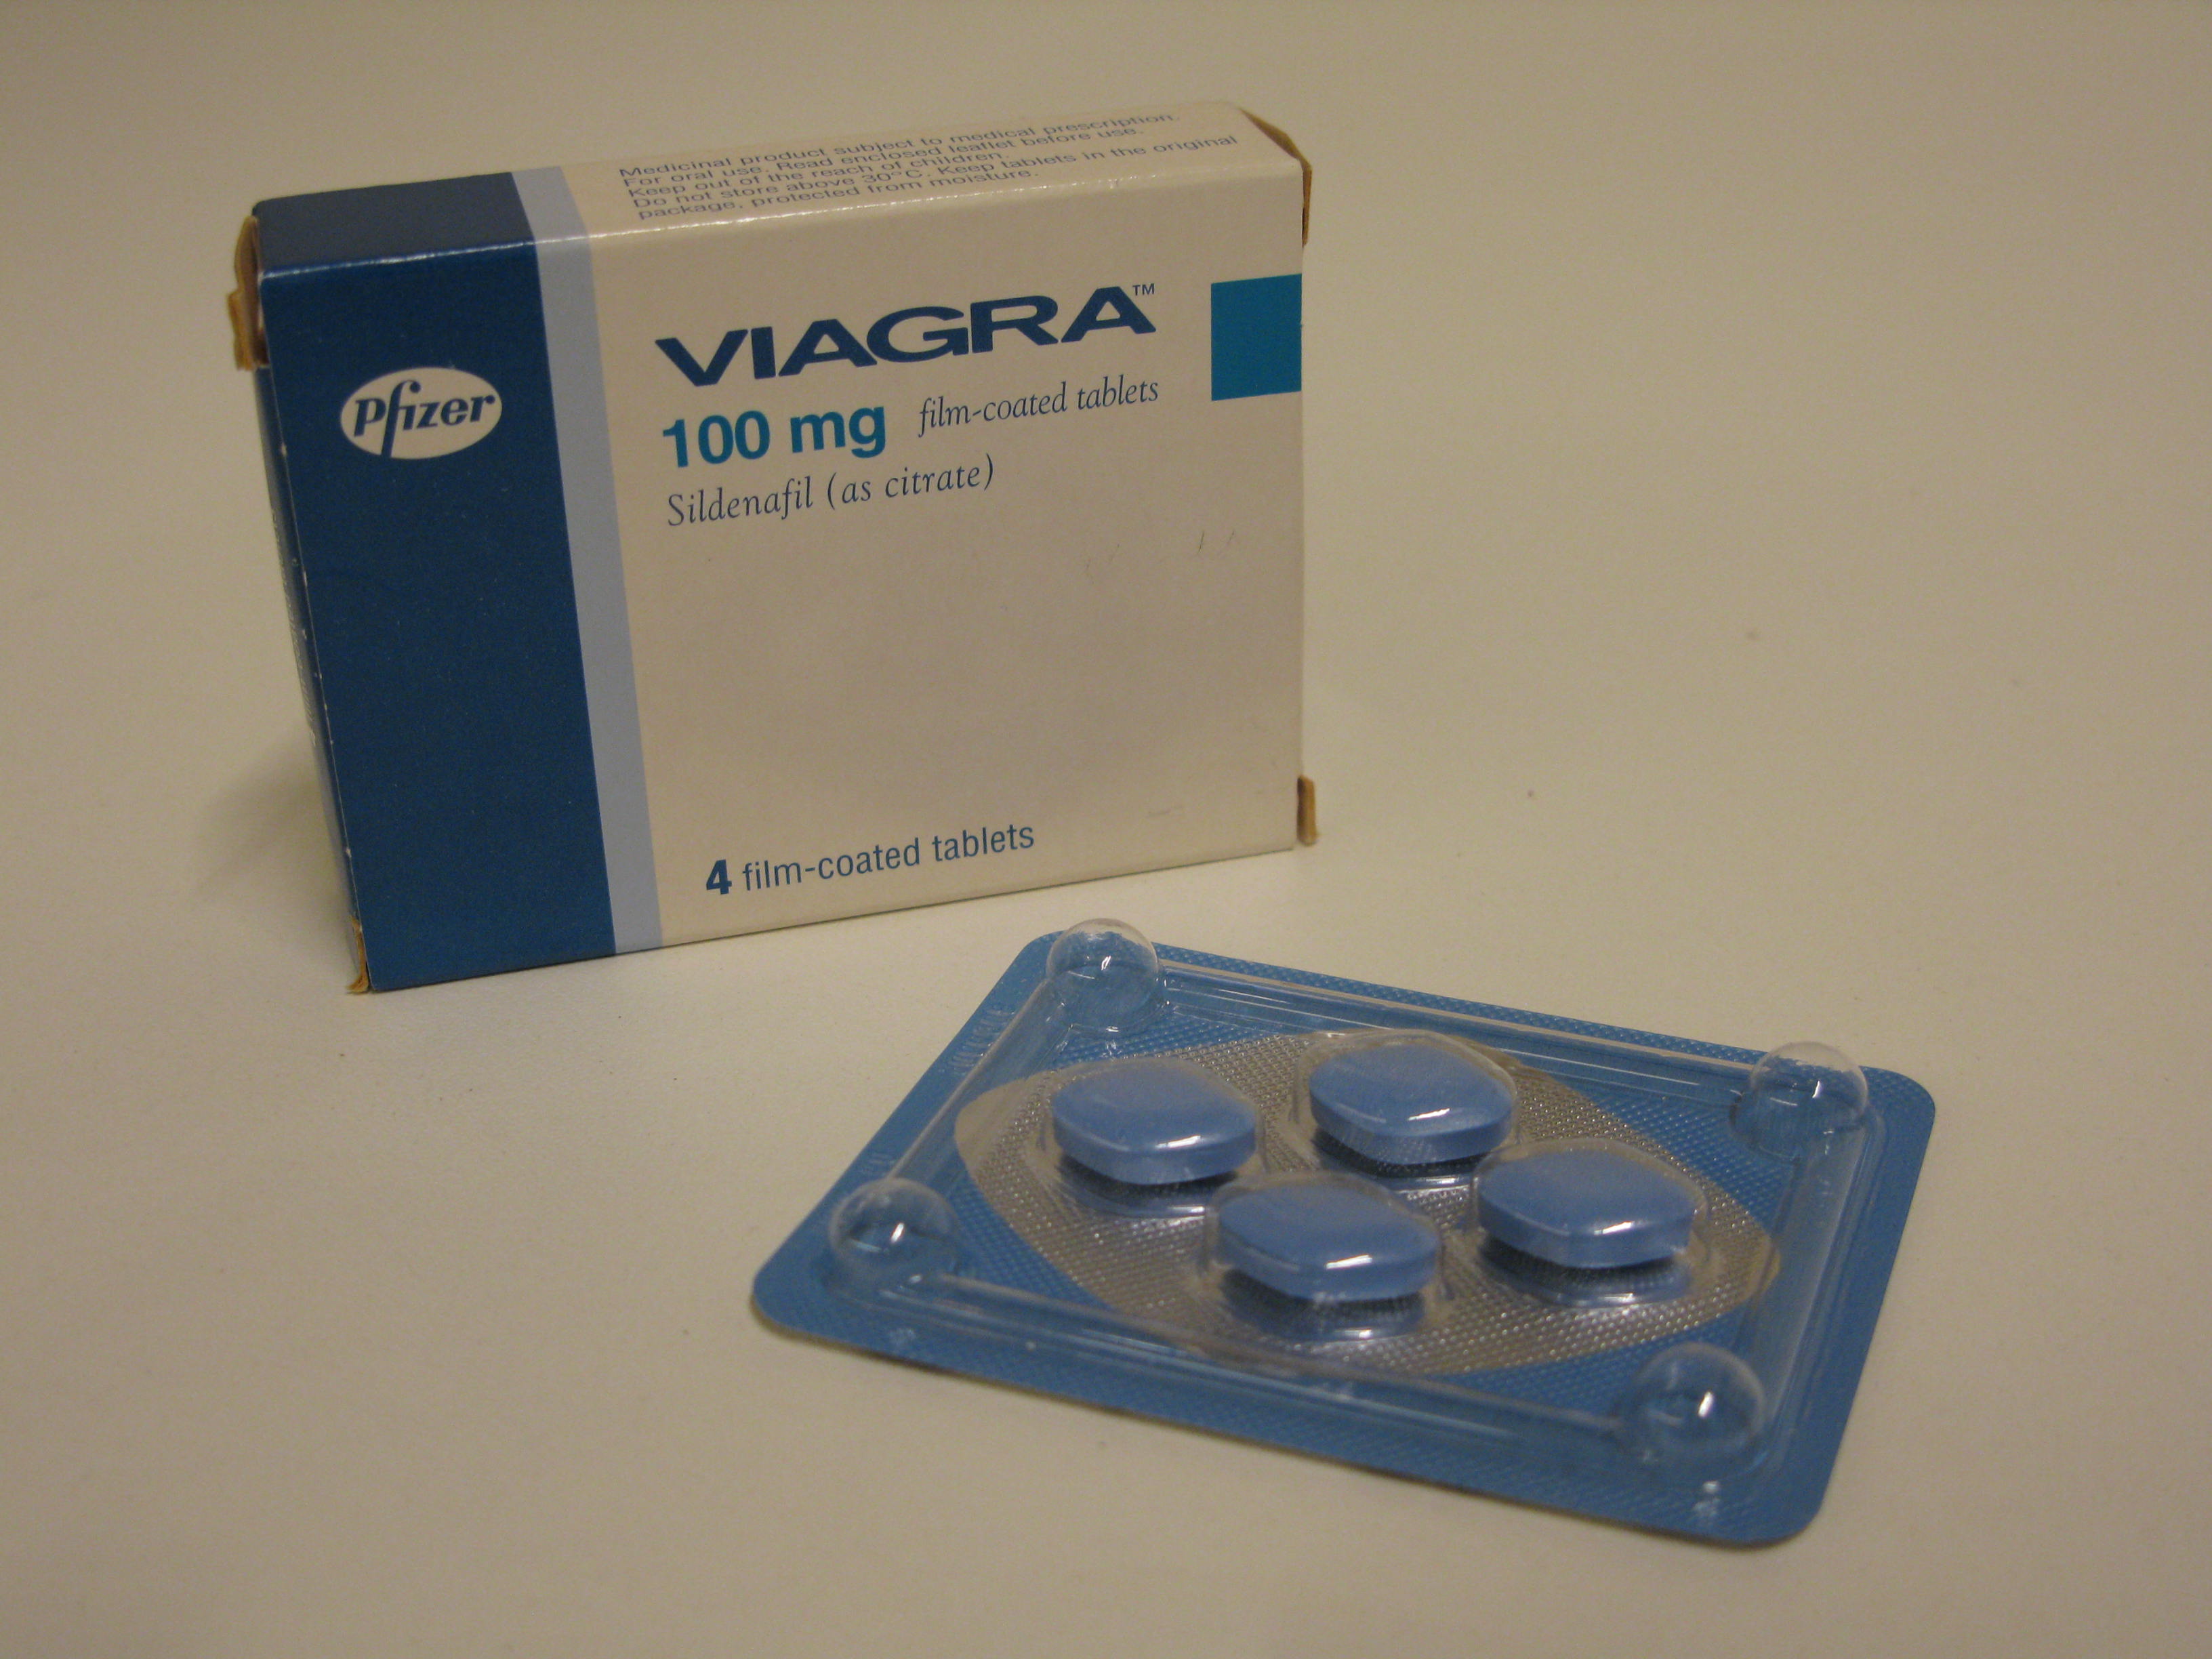 Viagra, 1997. On loan from the Royal Pharmaceutical Society. Sildenafil citrate’ was approved for use for erectile dysfunction in 1998. Originally made to treat hypertension, men involved in early studies began to notice its other useful side effect. Yet it may be younger men under pressure to perform that explains the rise in its use, rather than older men who are more likely to find alternative ways to be sexual.